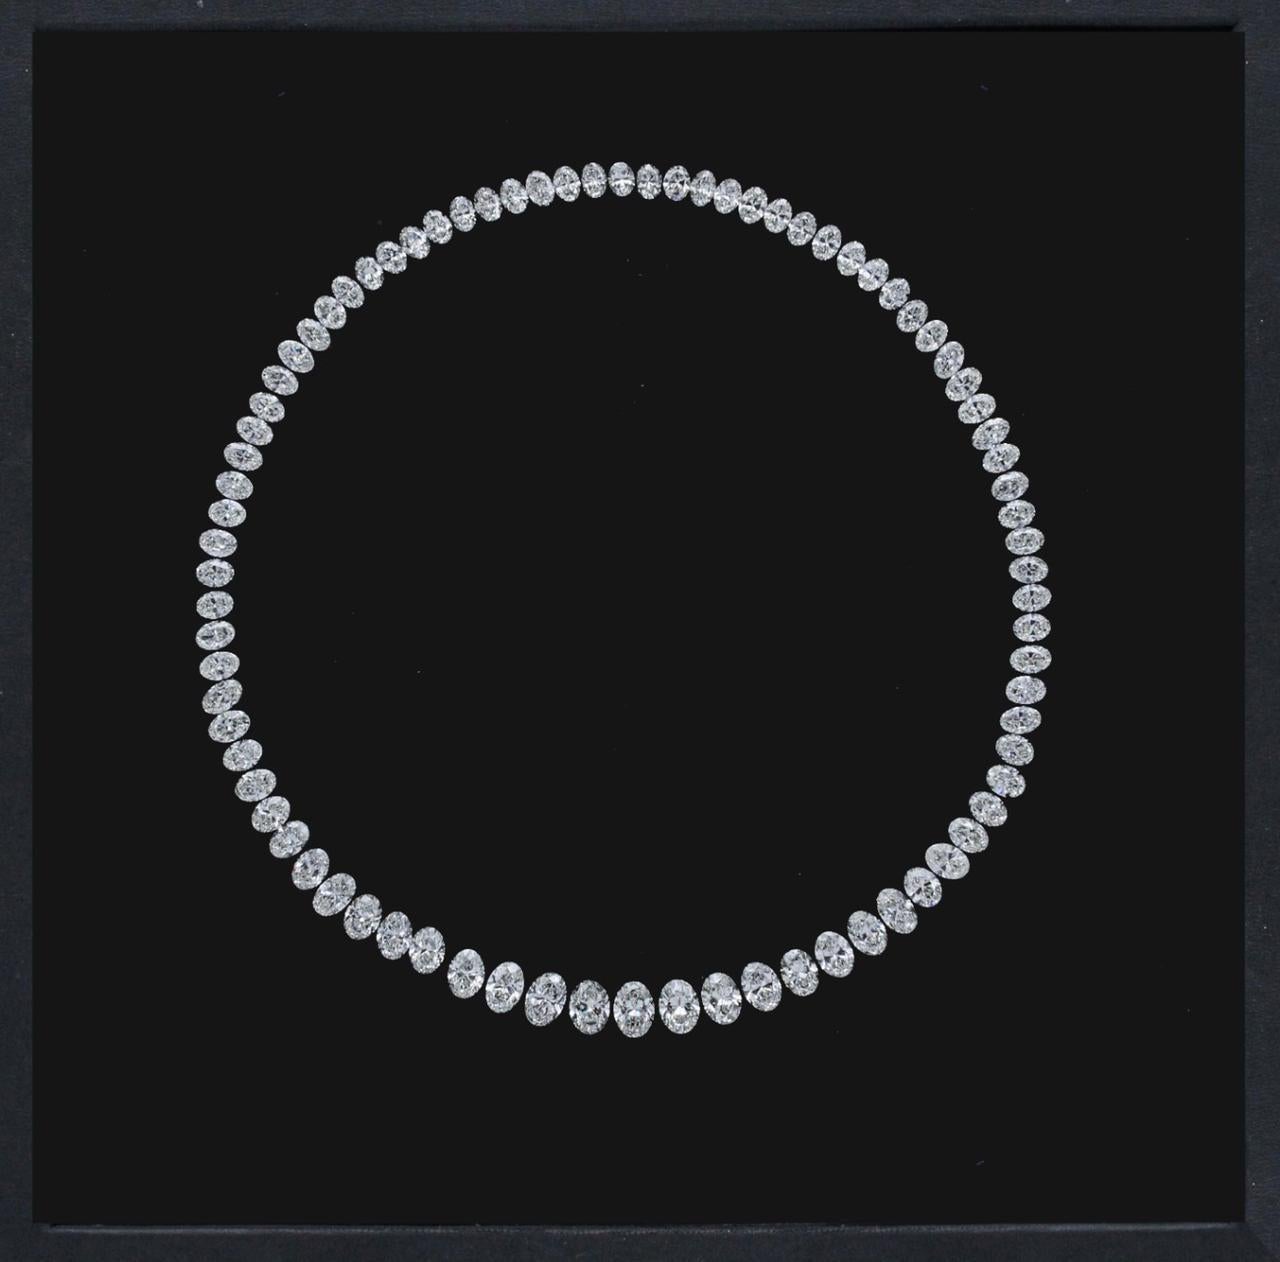 From The Vault At Emilio Jewelry New York,
Let Emilio Jewelry create your dream necklace for you, exactly as your heart desires! A spectacular layout of natural Gia certified oval diamonds, ranging from 1.06cts down to .40ct each. 
Majority are G-H